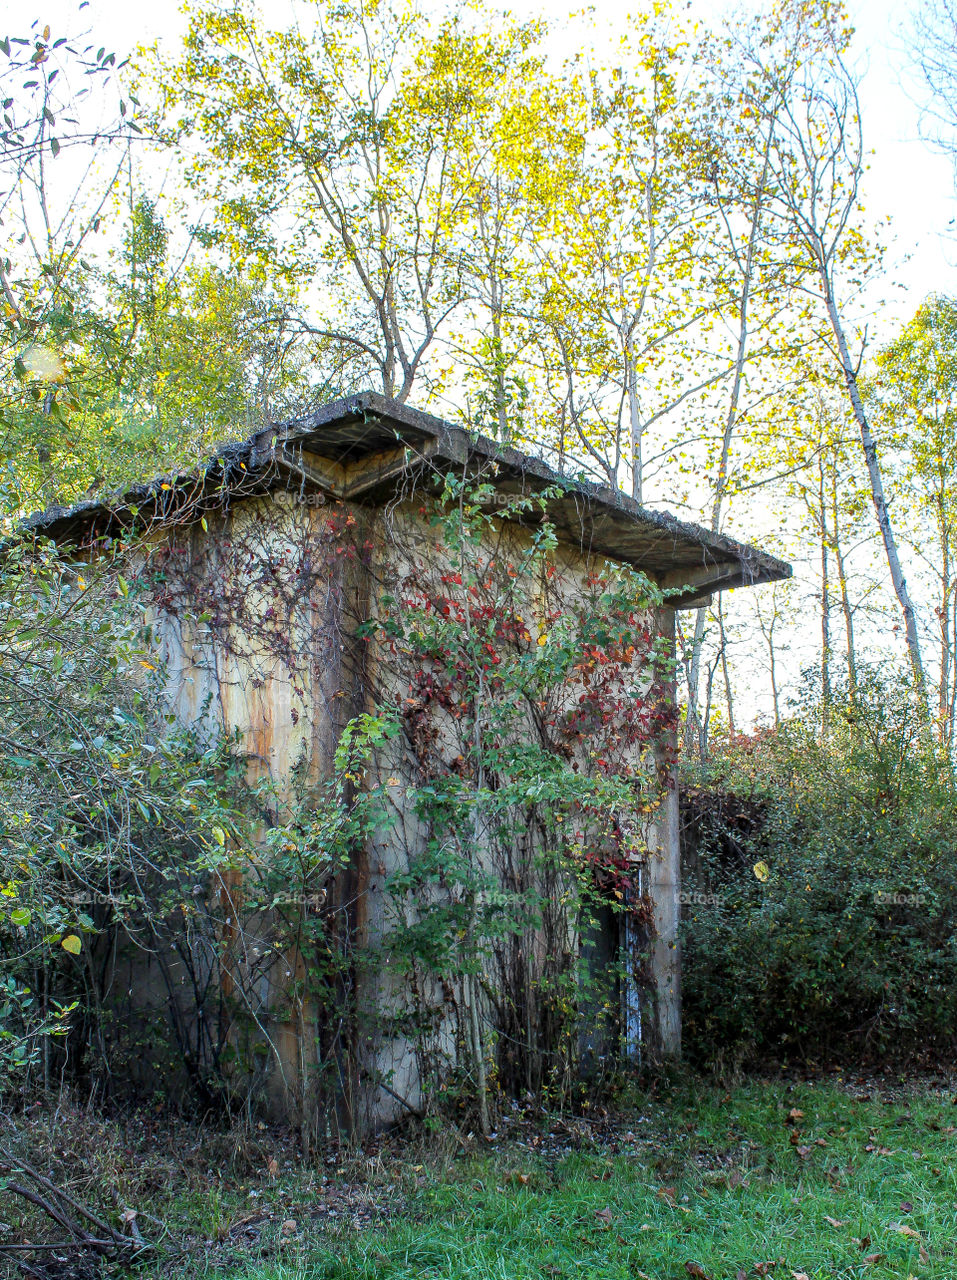 Abandoned concrete building from the WWll era West Virginia Ordinance Works covered in vines 